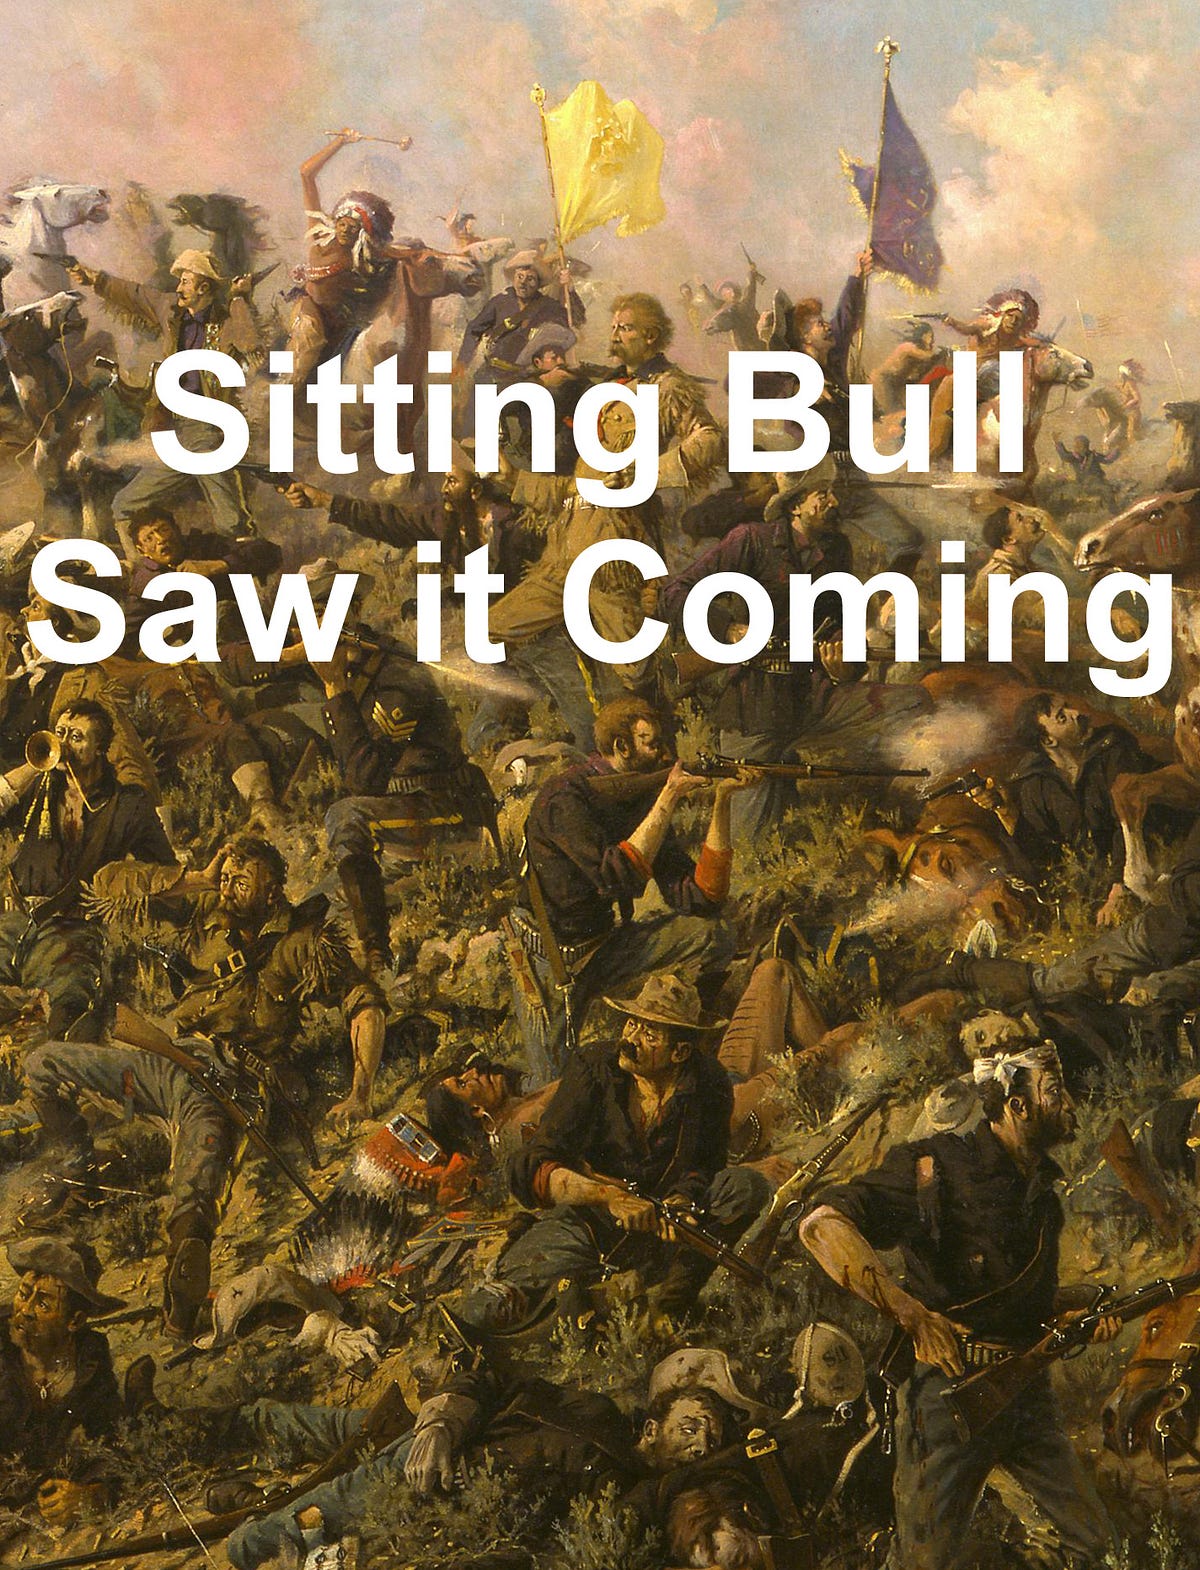 SITTING BULL SAW IT COMING!. Much has been written about this event… | by  David Bunnell | Medium